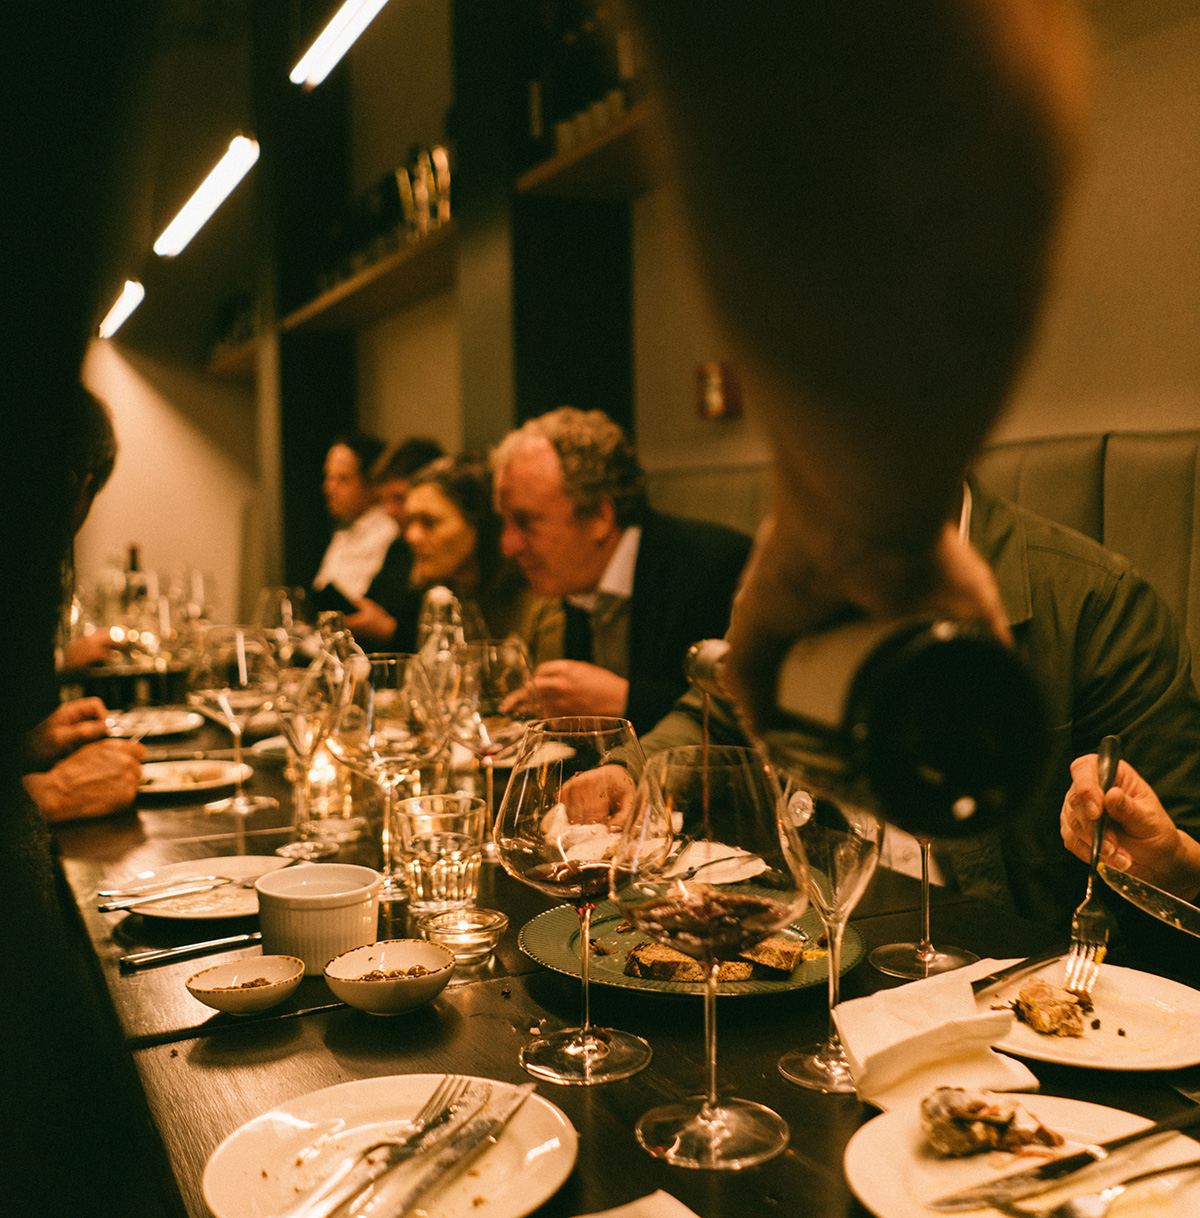 Michael Henley pouring a bottle of wine to a table happy diners